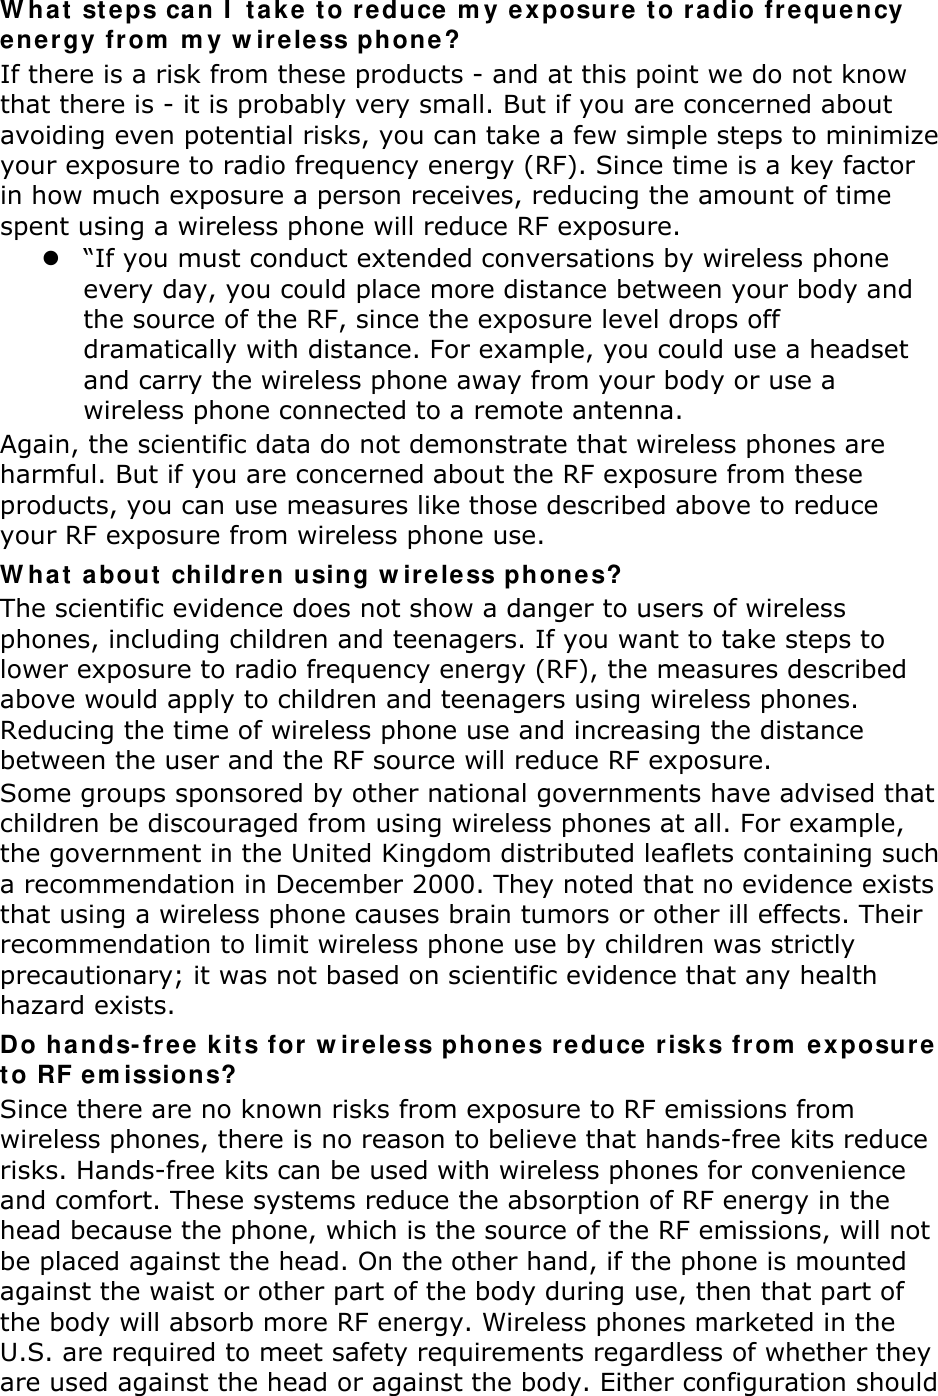 W hat  st eps ca n I  t a k e t o reduce m y exposure  t o radio freque n cy ener gy from  m y w ireless phone? If there is a risk from these products - and at this point we do not know that there is - it is probably very small. But if you are concerned about avoiding even potential risks, you can take a few simple steps to minimize your exposure to radio frequency energy (RF). Since time is a key factor in how much exposure a person receives, reducing the amount of time spent using a wireless phone will reduce RF exposure.  “If you must conduct extended conversations by wireless phone every day, you could place more distance between your body and the source of the RF, since the exposure level drops off dramatically with distance. For example, you could use a headset and carry the wireless phone away from your body or use a wireless phone connected to a remote antenna. Again, the scientific data do not demonstrate that wireless phones are harmful. But if you are concerned about the RF exposure from these products, you can use measures like those described above to reduce your RF exposure from wireless phone use. W hat  about  childre n using w ir eless phone s? The scientific evidence does not show a danger to users of wireless phones, including children and teenagers. If you want to take steps to lower exposure to radio frequency energy (RF), the measures described above would apply to children and teenagers using wireless phones. Reducing the time of wireless phone use and increasing the distance between the user and the RF source will reduce RF exposure. Some groups sponsored by other national governments have advised that children be discouraged from using wireless phones at all. For example, the government in the United Kingdom distributed leaflets containing such a recommendation in December 2000. They noted that no evidence exists that using a wireless phone causes brain tumors or other ill effects. Their recommendation to limit wireless phone use by children was strictly precautionary; it was not based on scientific evidence that any health hazard exists.   Do h ands- fr ee k it s for w ireless phones re duce risk s from  e x posure t o RF em issions? Since there are no known risks from exposure to RF emissions from wireless phones, there is no reason to believe that hands-free kits reduce risks. Hands-free kits can be used with wireless phones for convenience and comfort. These systems reduce the absorption of RF energy in the head because the phone, which is the source of the RF emissions, will not be placed against the head. On the other hand, if the phone is mounted against the waist or other part of the body during use, then that part of the body will absorb more RF energy. Wireless phones marketed in the U.S. are required to meet safety requirements regardless of whether they are used against the head or against the body. Either configuration should 